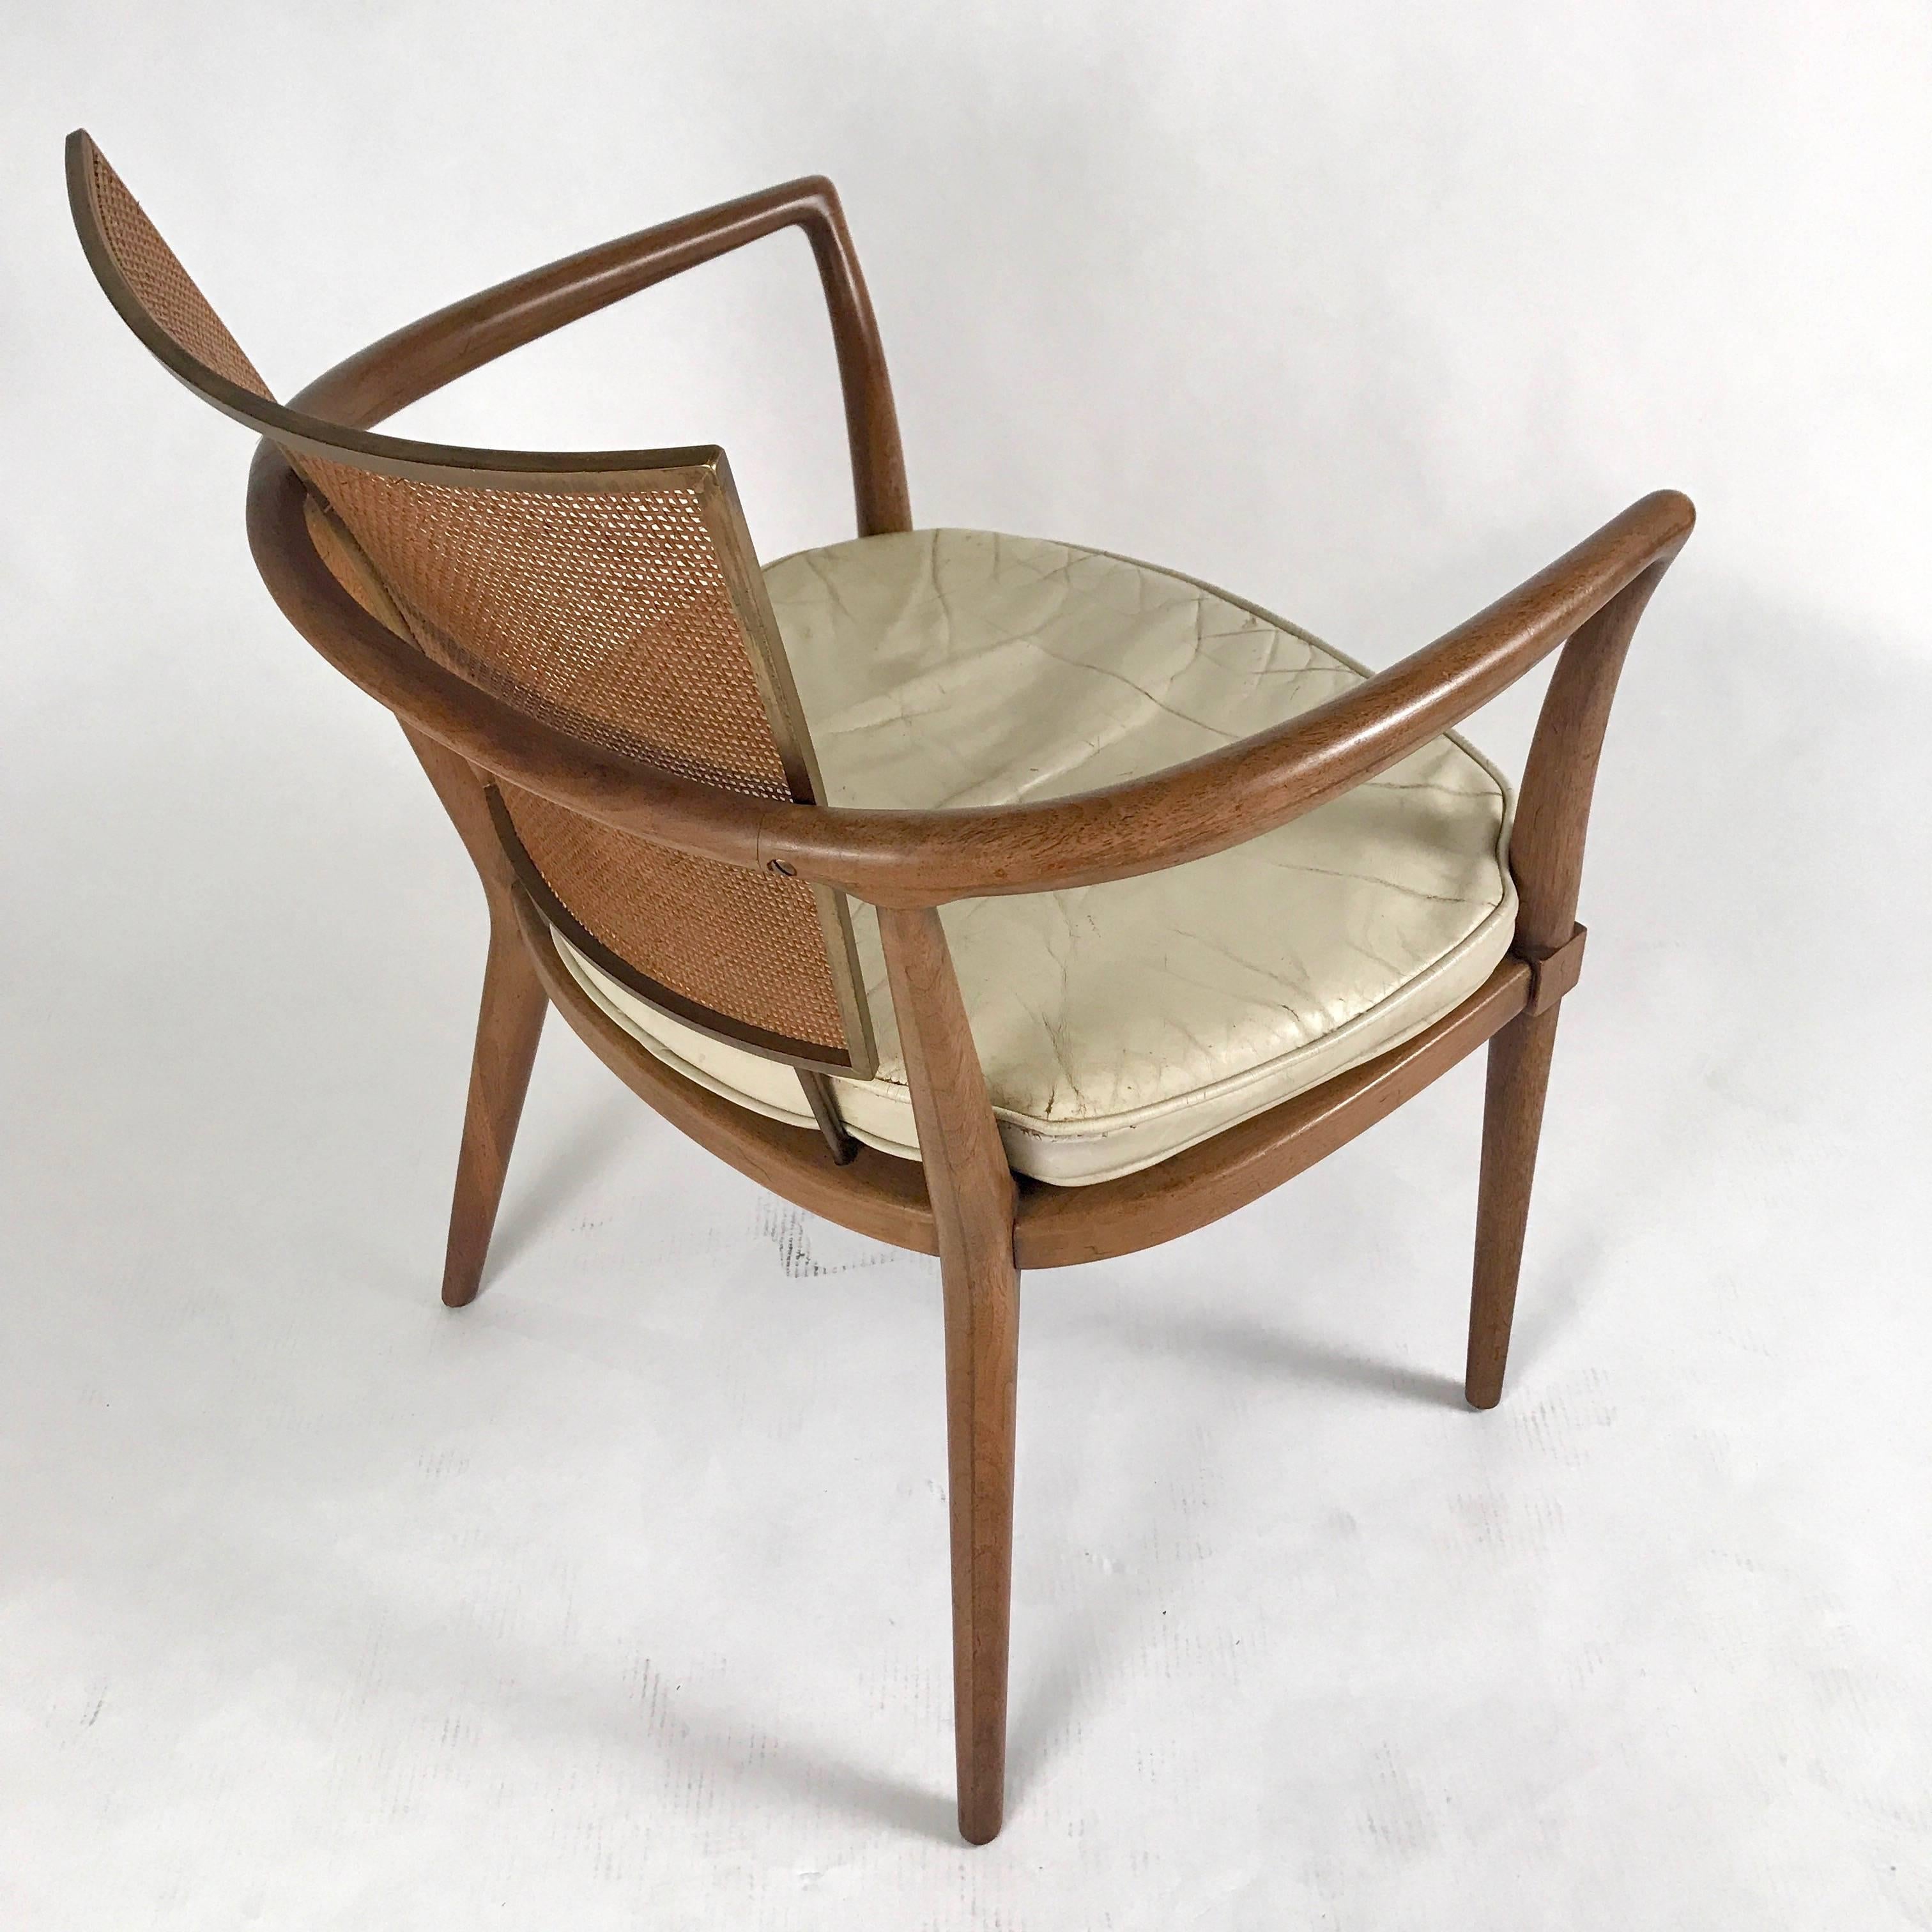 Mid-20th Century Rare Bert England for Johnson Furniture Armchair with Cane, Brass and Leather